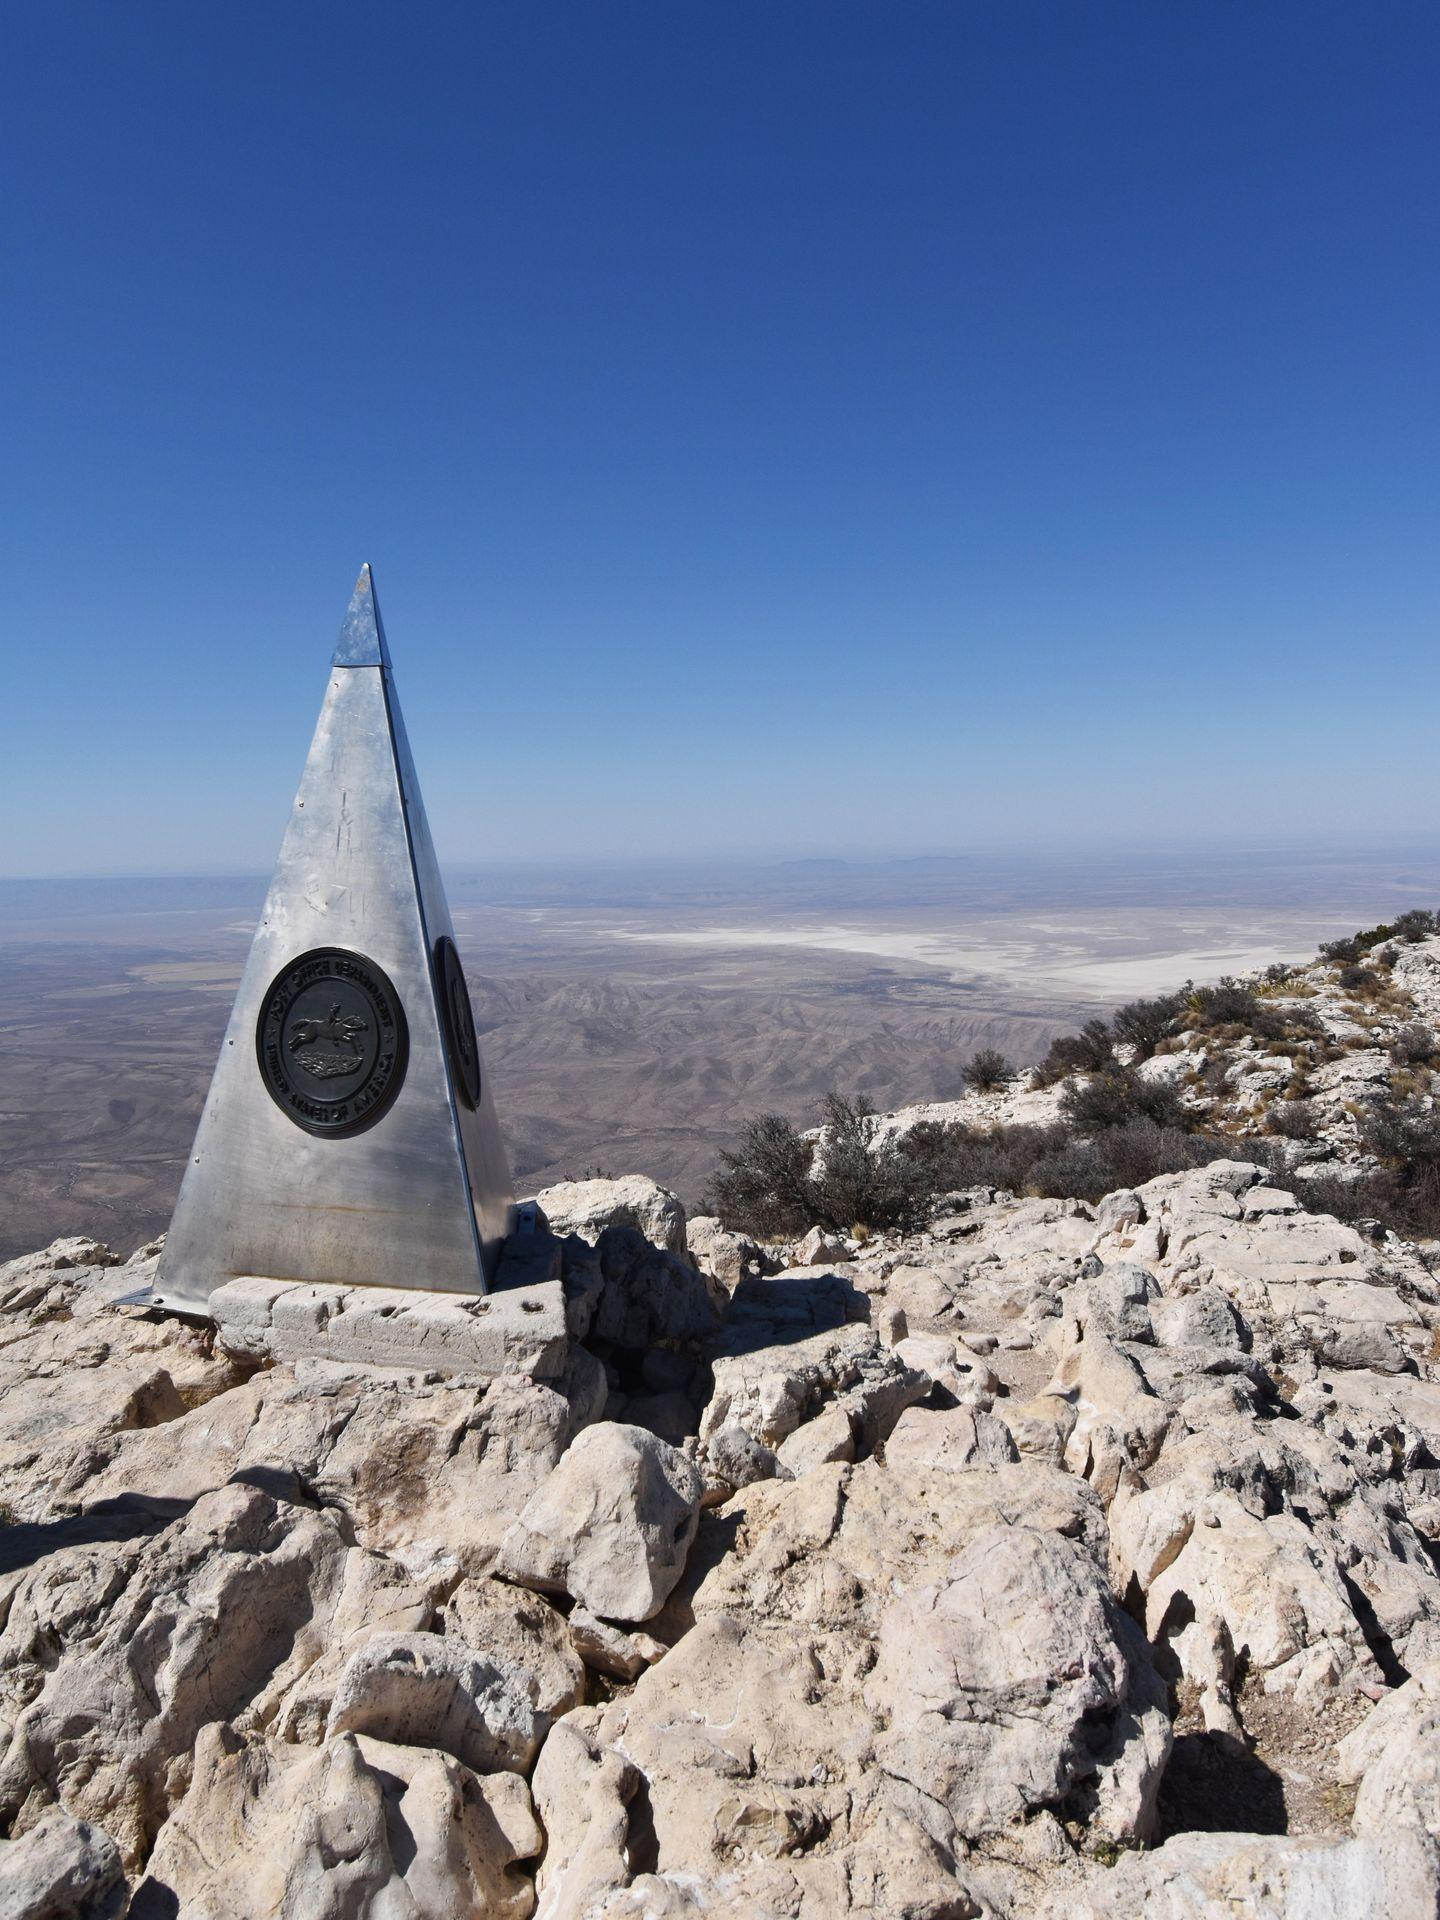 A silver pyramid on top of Guadalupe Peak.